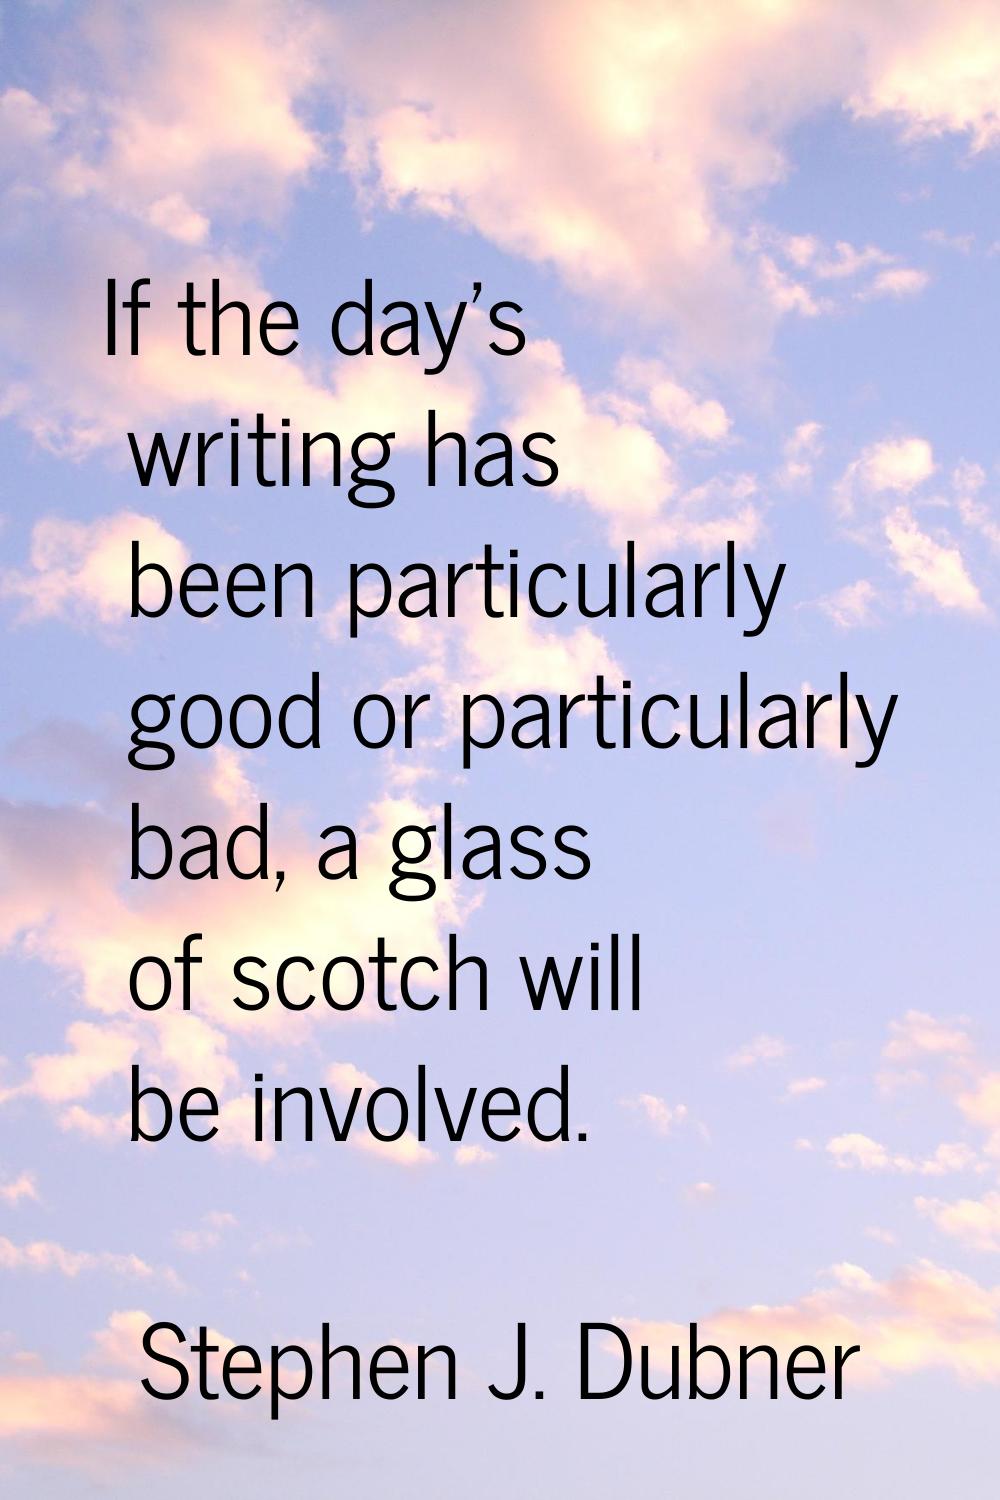 If the day's writing has been particularly good or particularly bad, a glass of scotch will be invo